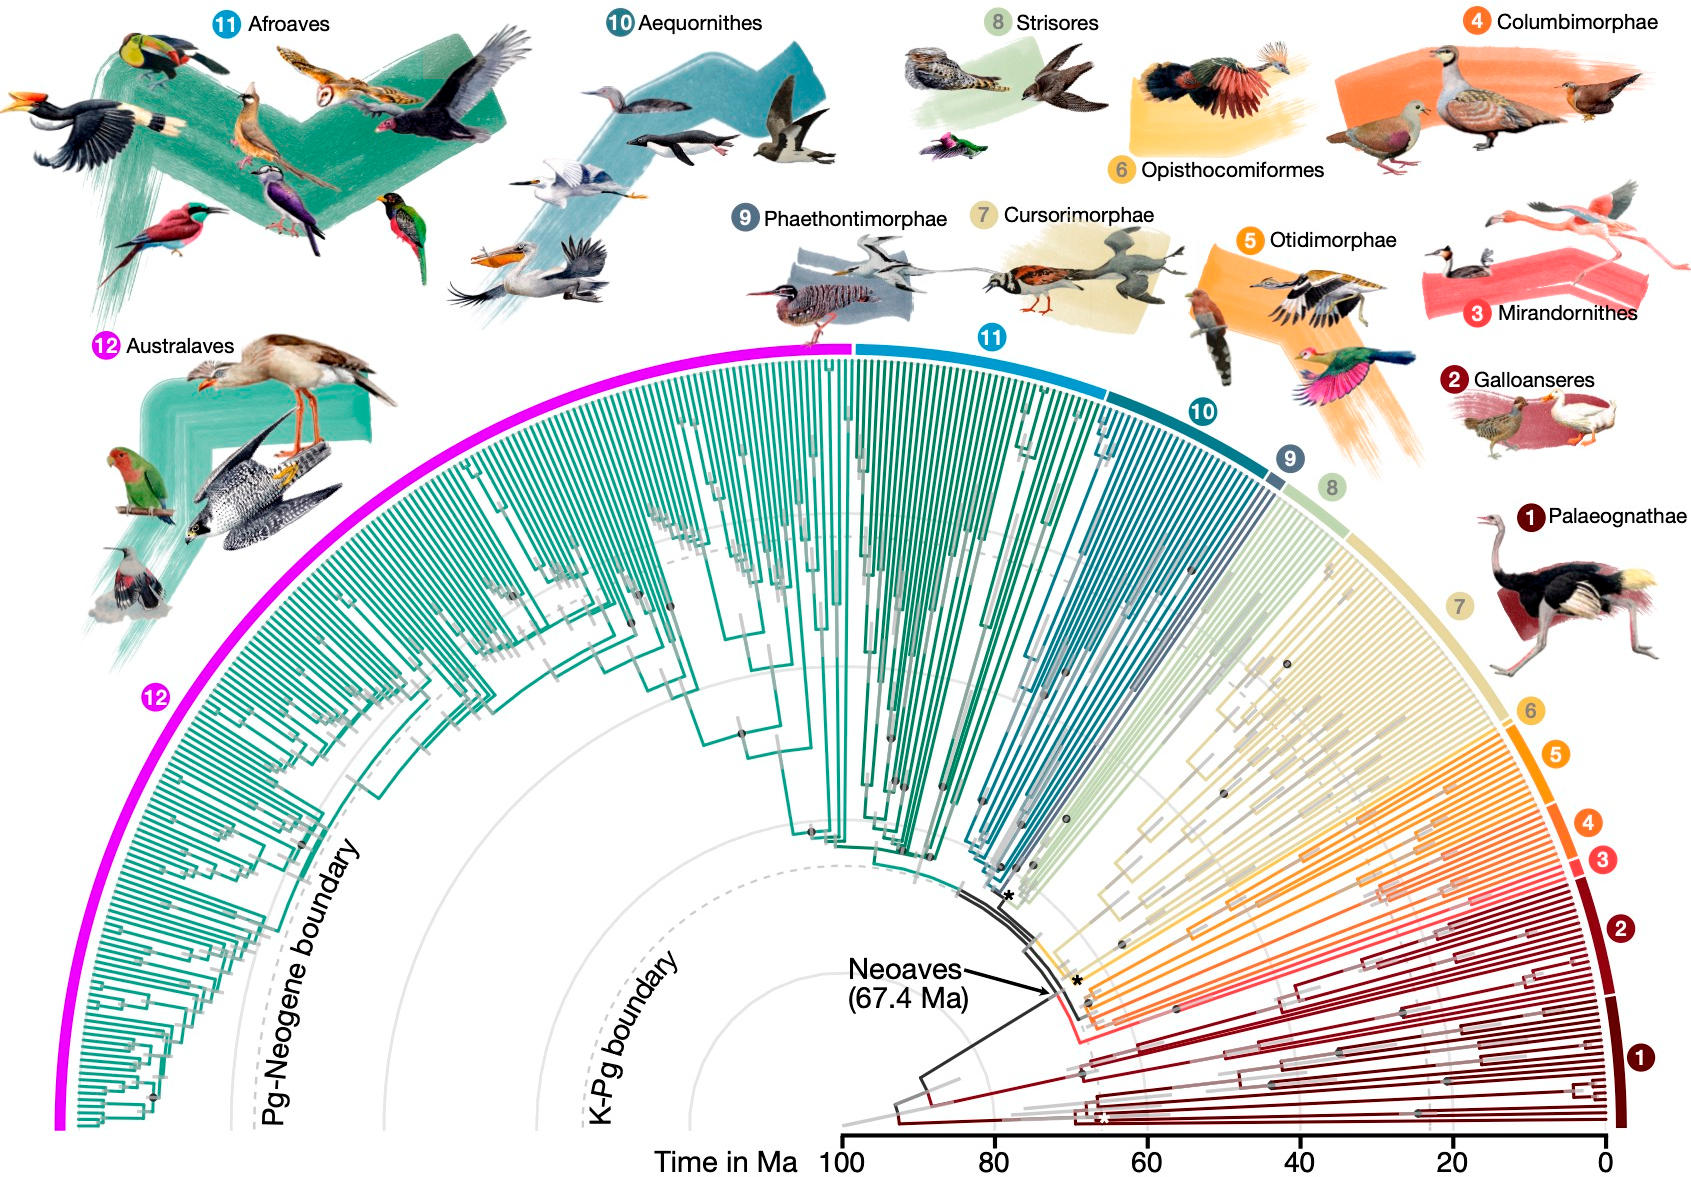 Divergence-Times-for-363-Bird-Species-Based-on-63430-Intergenic-Loci.jpg